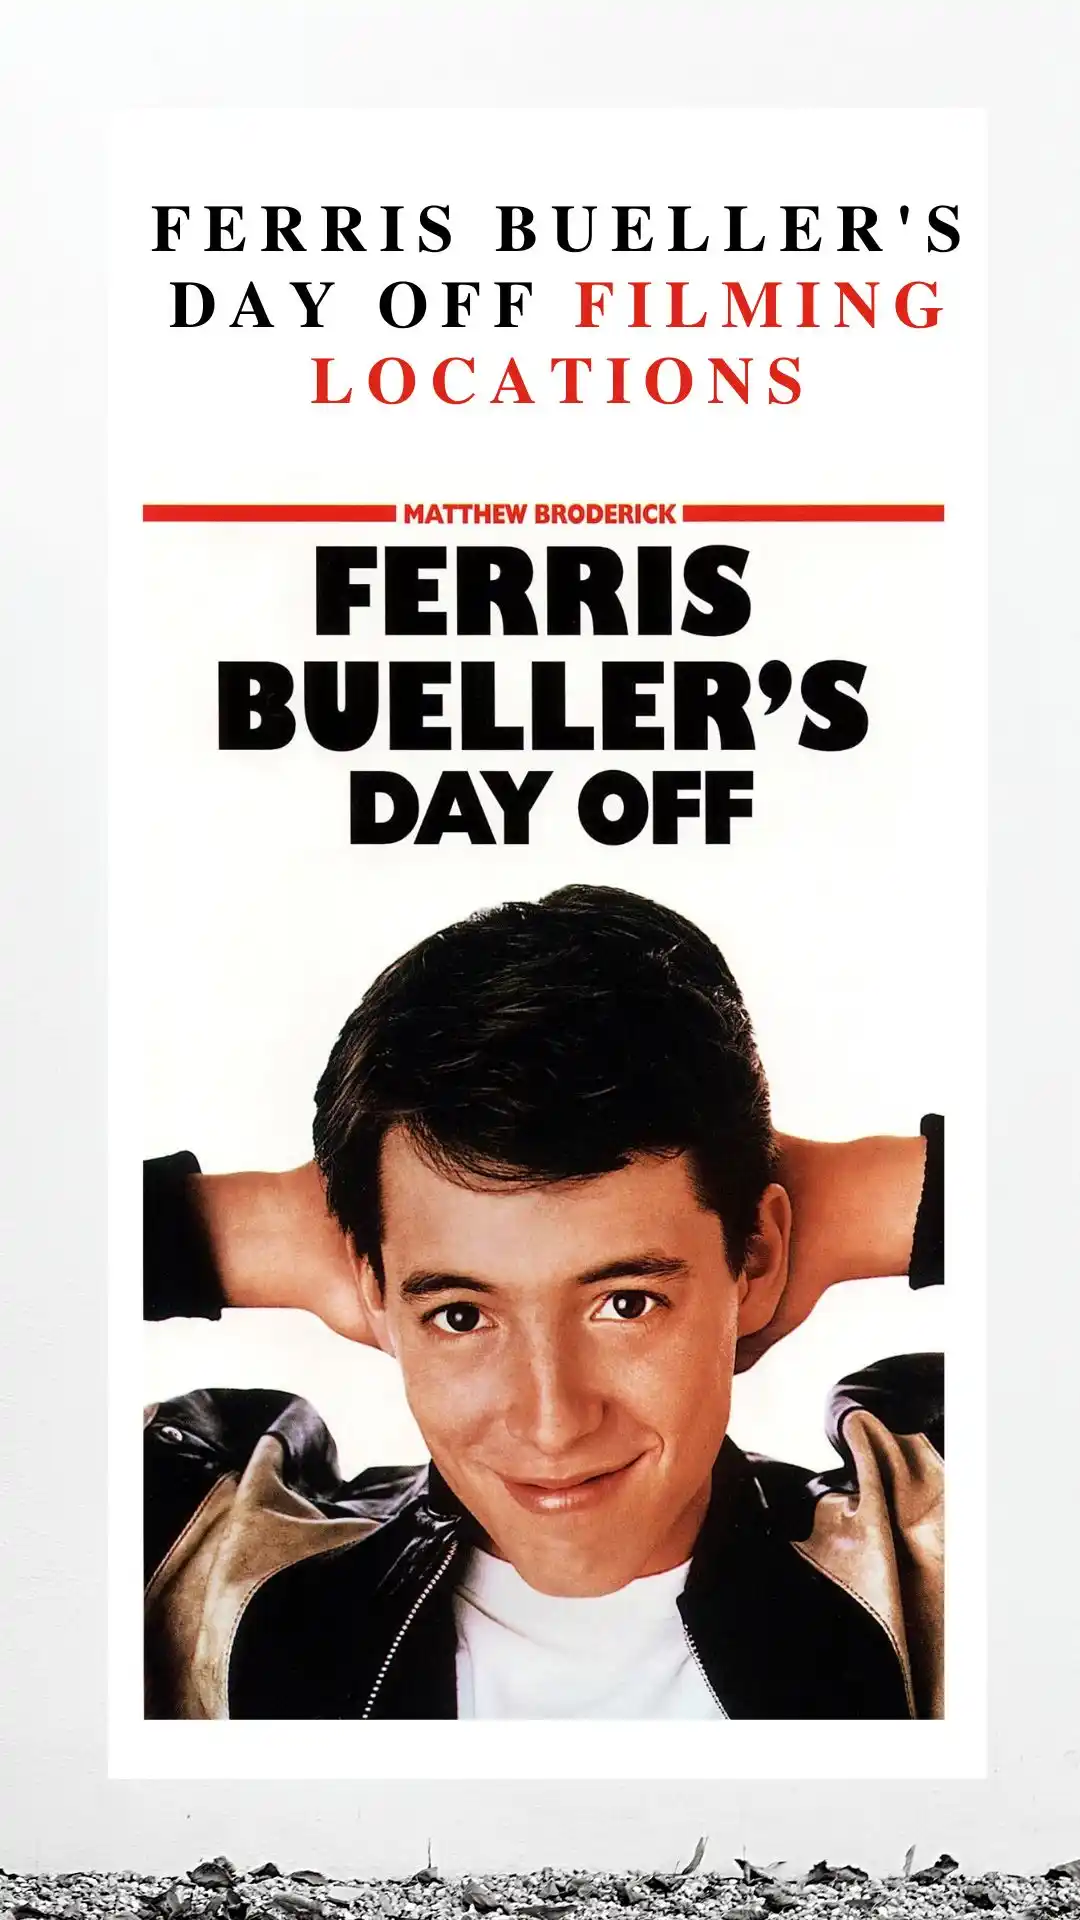 Ferris Bueller's Day Off Filming Locations